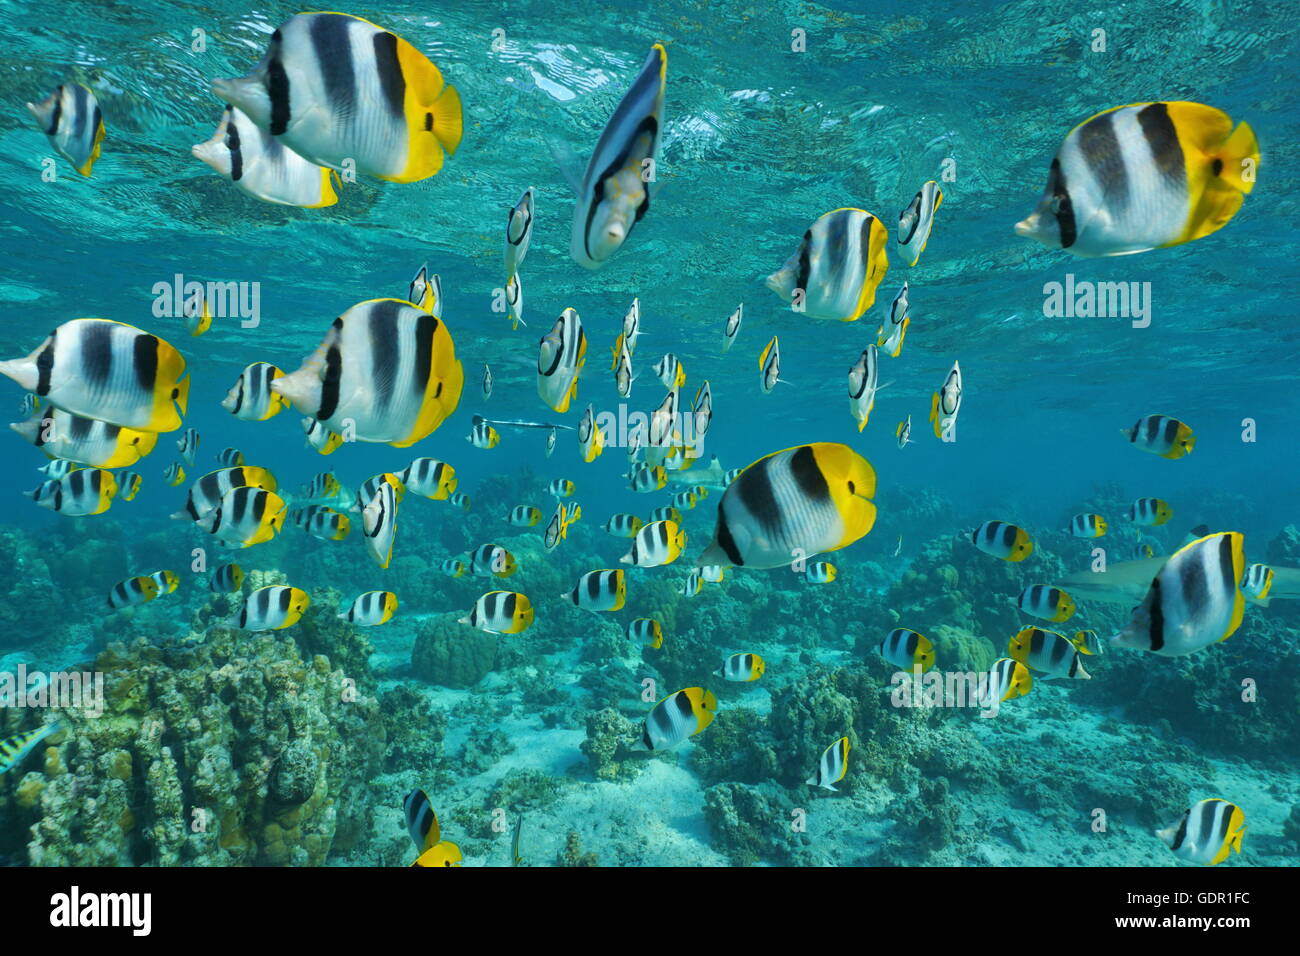 Shoal of tropical fish, Pacific double-saddle butterflyfish, Chaetodon ulietensis, in shallow water of a lagoon, Pacific ocean, Stock Photo